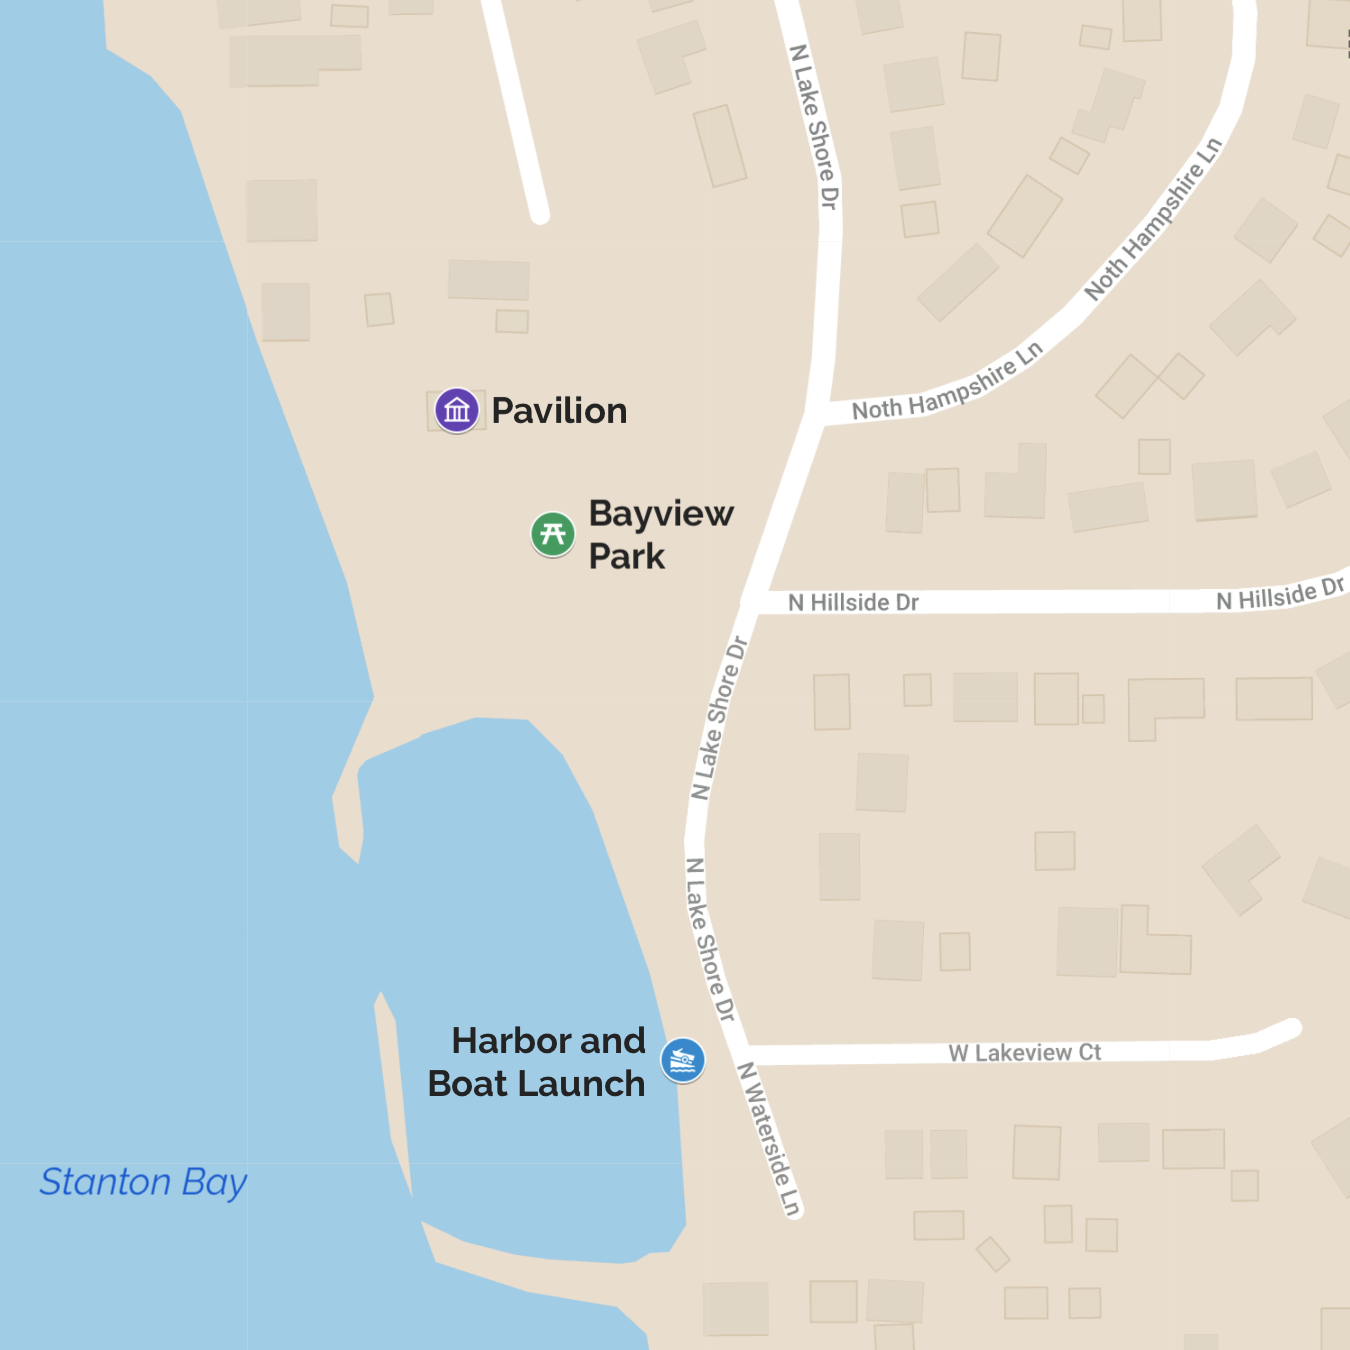 Bayview Park and Harbor